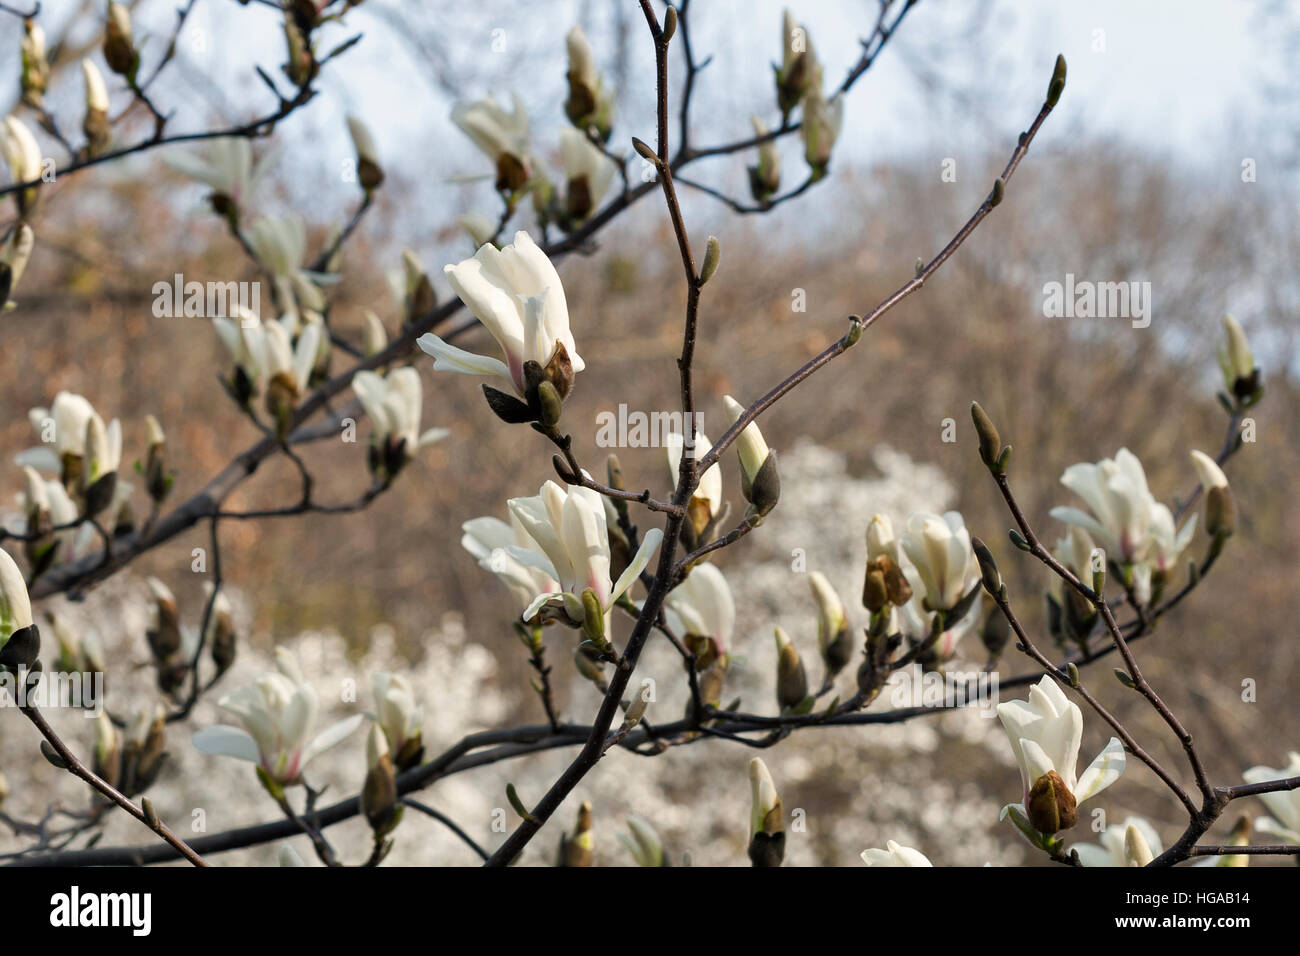 White magnolia branch with spring blooming flowers and buds closeup. Stock Photo